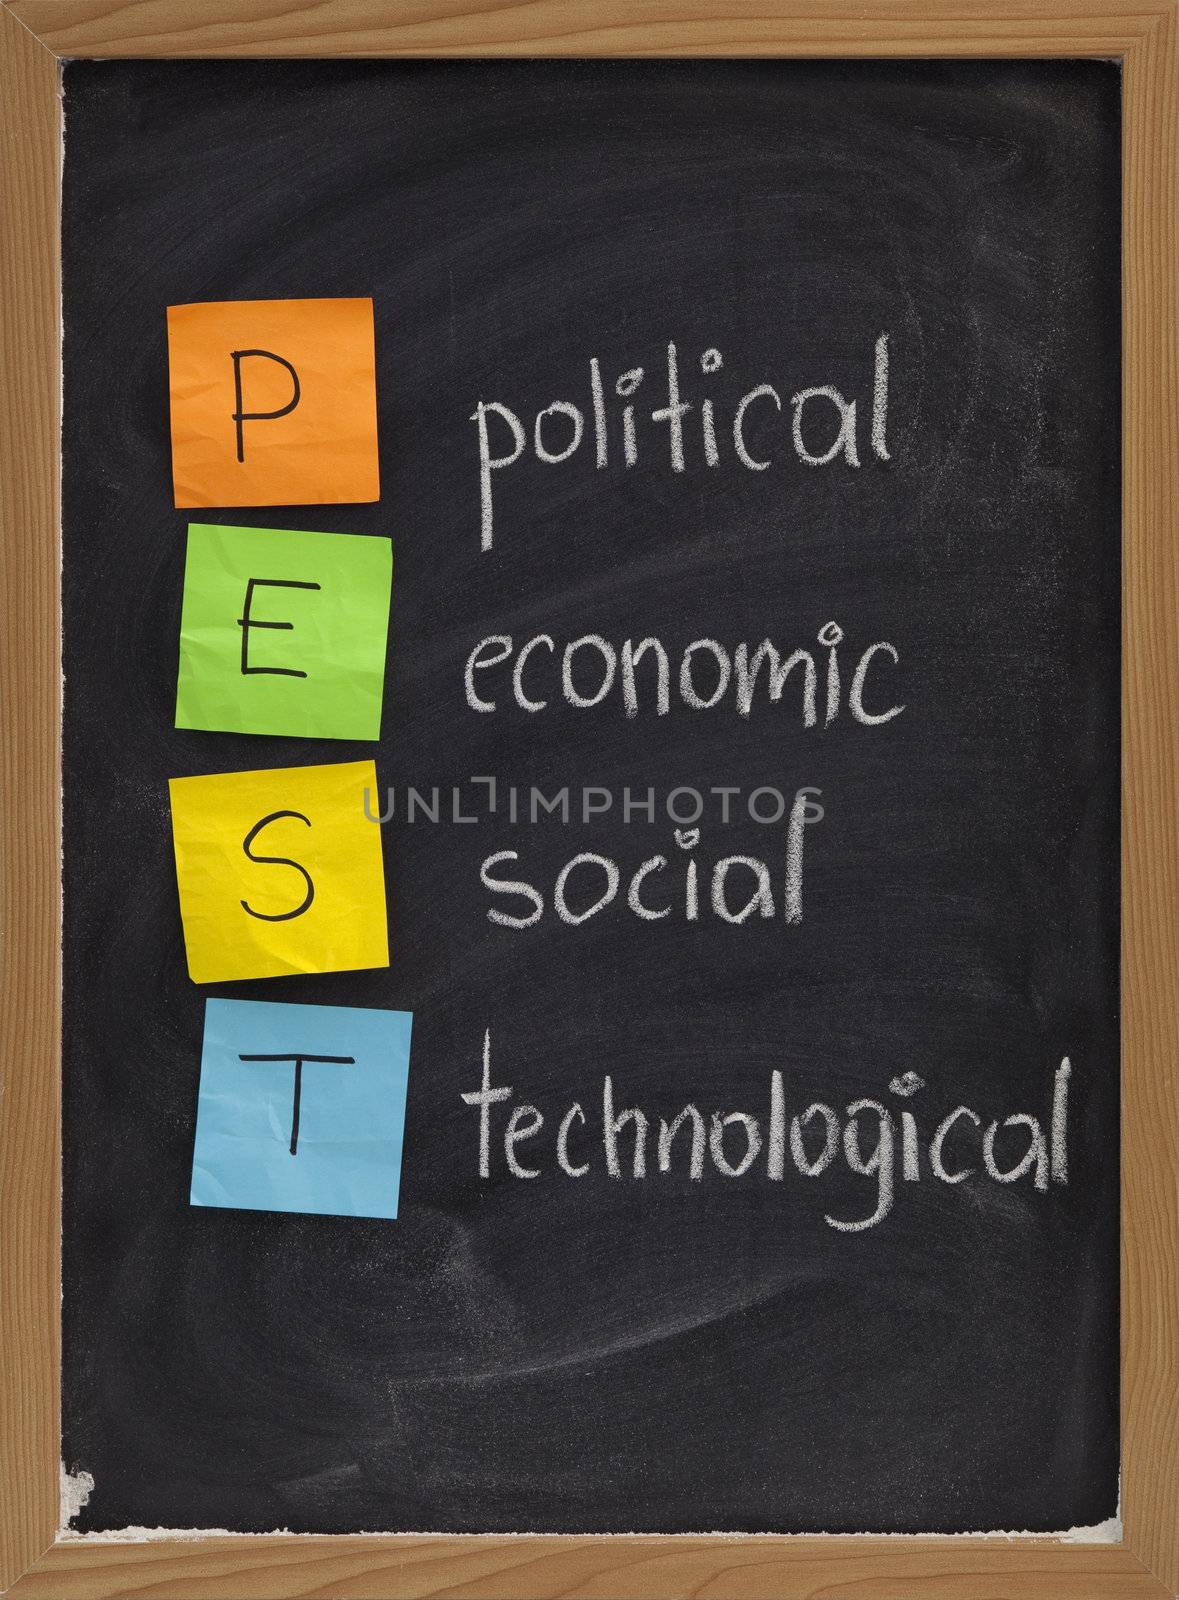 political, economic, social, technological analysis by PixelsAway